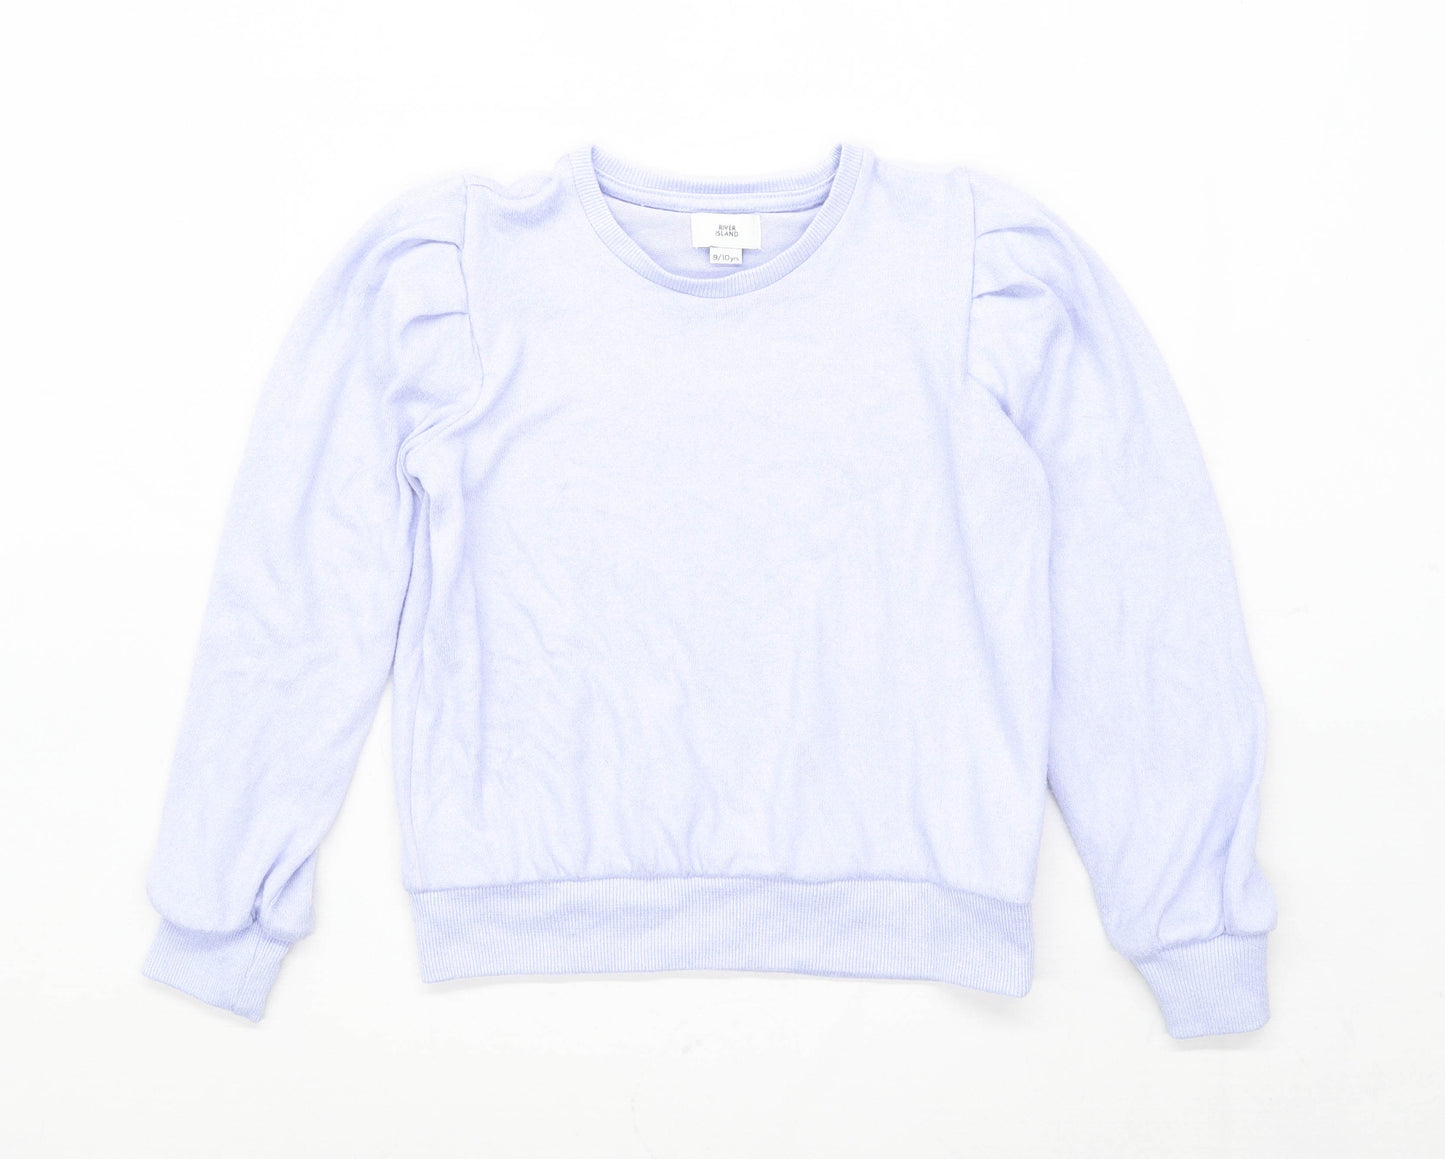 River Island Girls Blue Top Age 9-10 Years